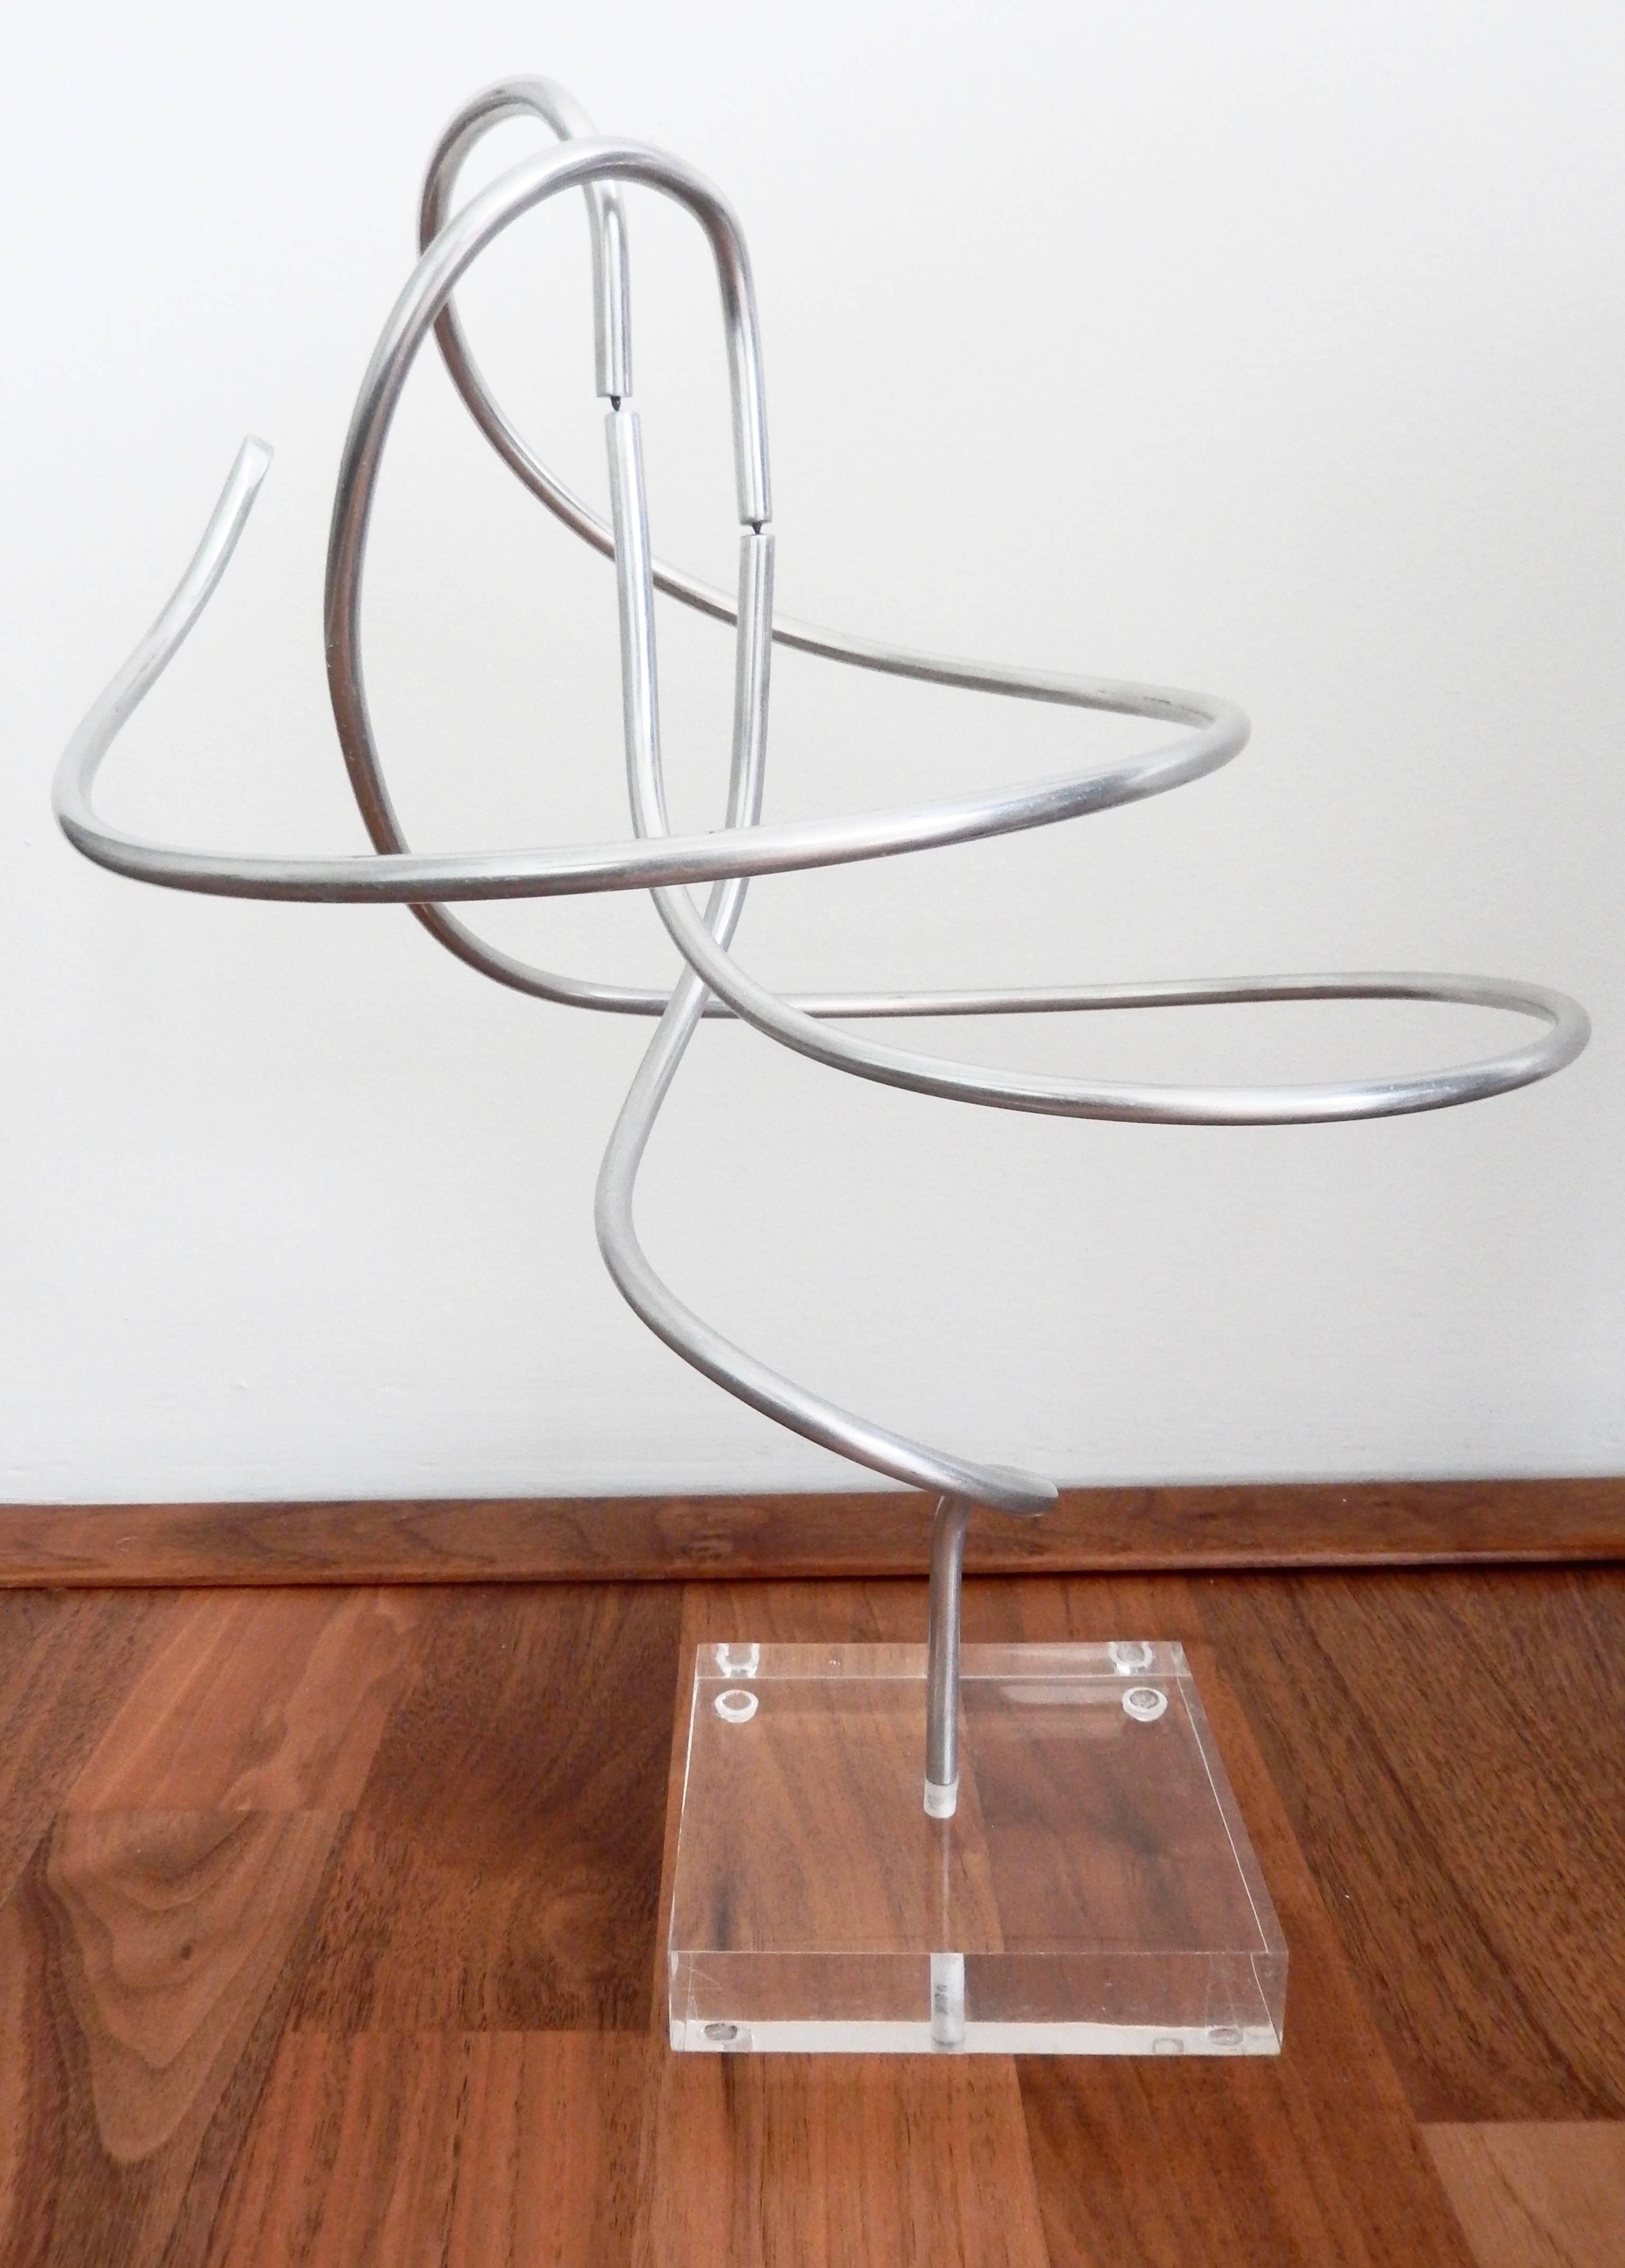 Two tubular aluminum spirals are ingeniously assembled to create this seventies Kinetic sculpture by American artist Charles Taylor. Delicately balanced, the work recalls Calder mobiles. Signed.

Plexiglass square base: 4.25 in x 4.25 in.